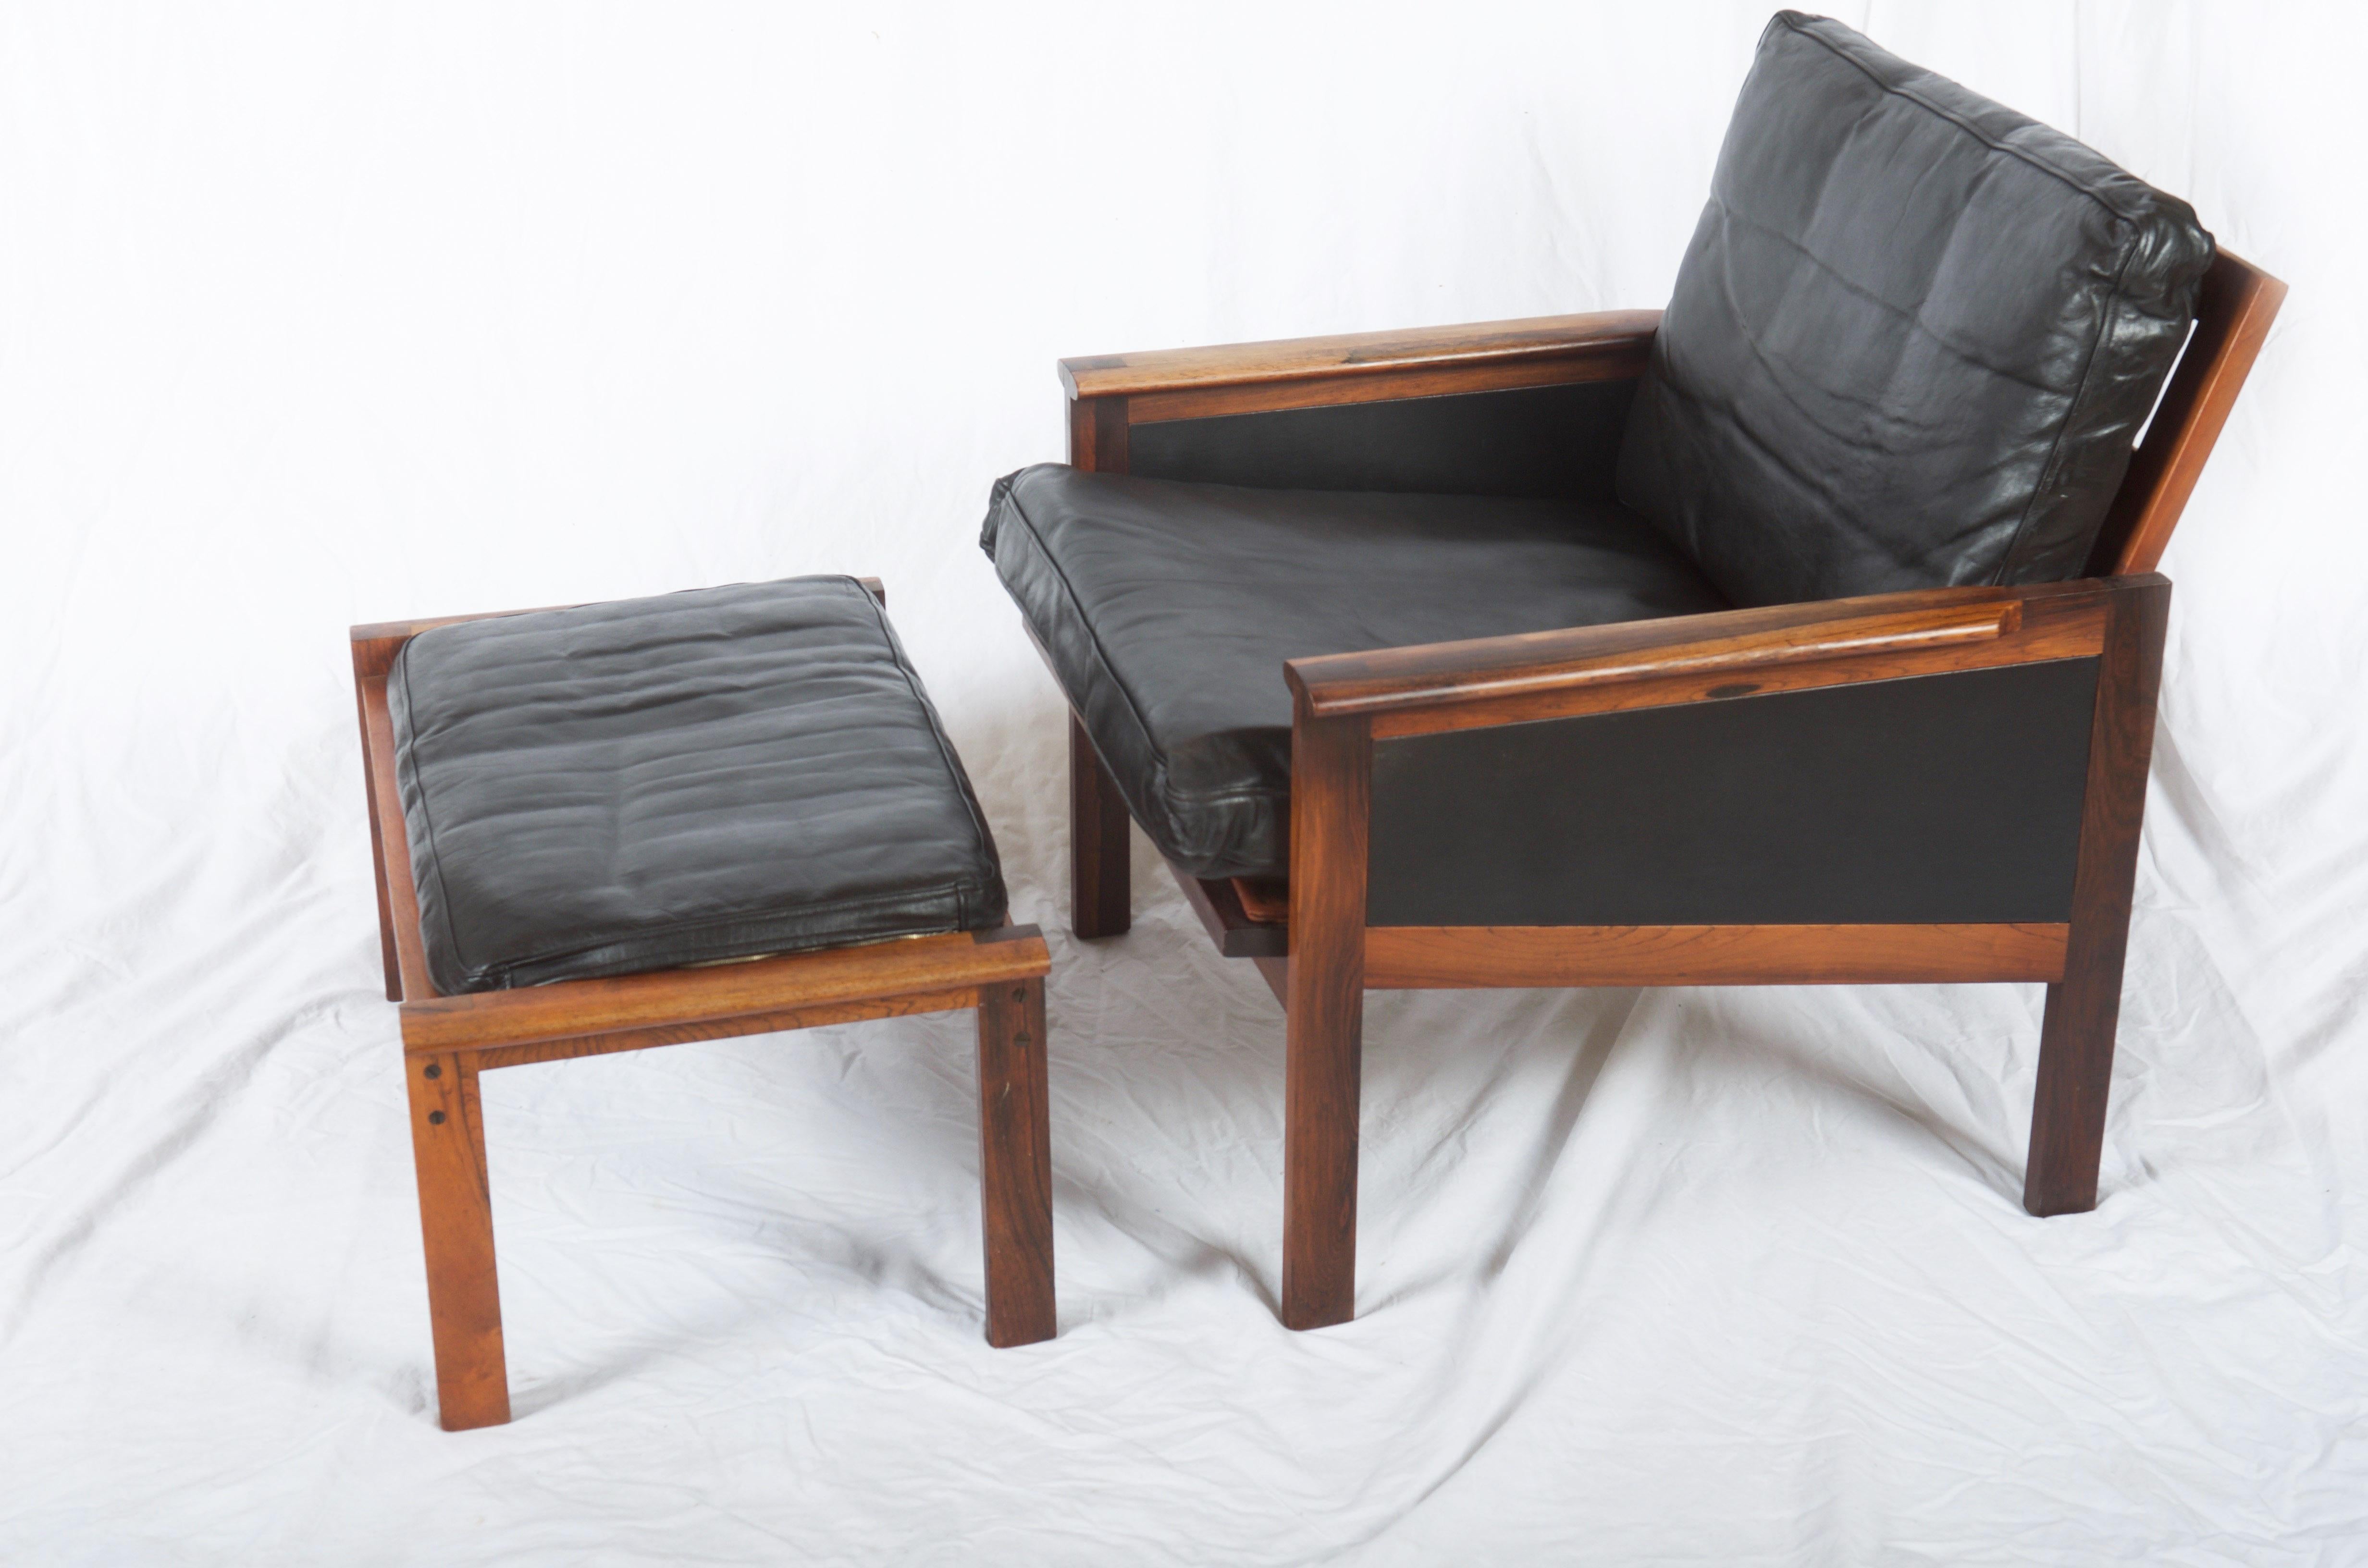 Illum Wikkelsø. Solid hardwood armchair, upholstered in black leather. Related stool H. 35 cm. Manufactured by N. Eilersen, model Capella. Traces of age and wear, including among other things.